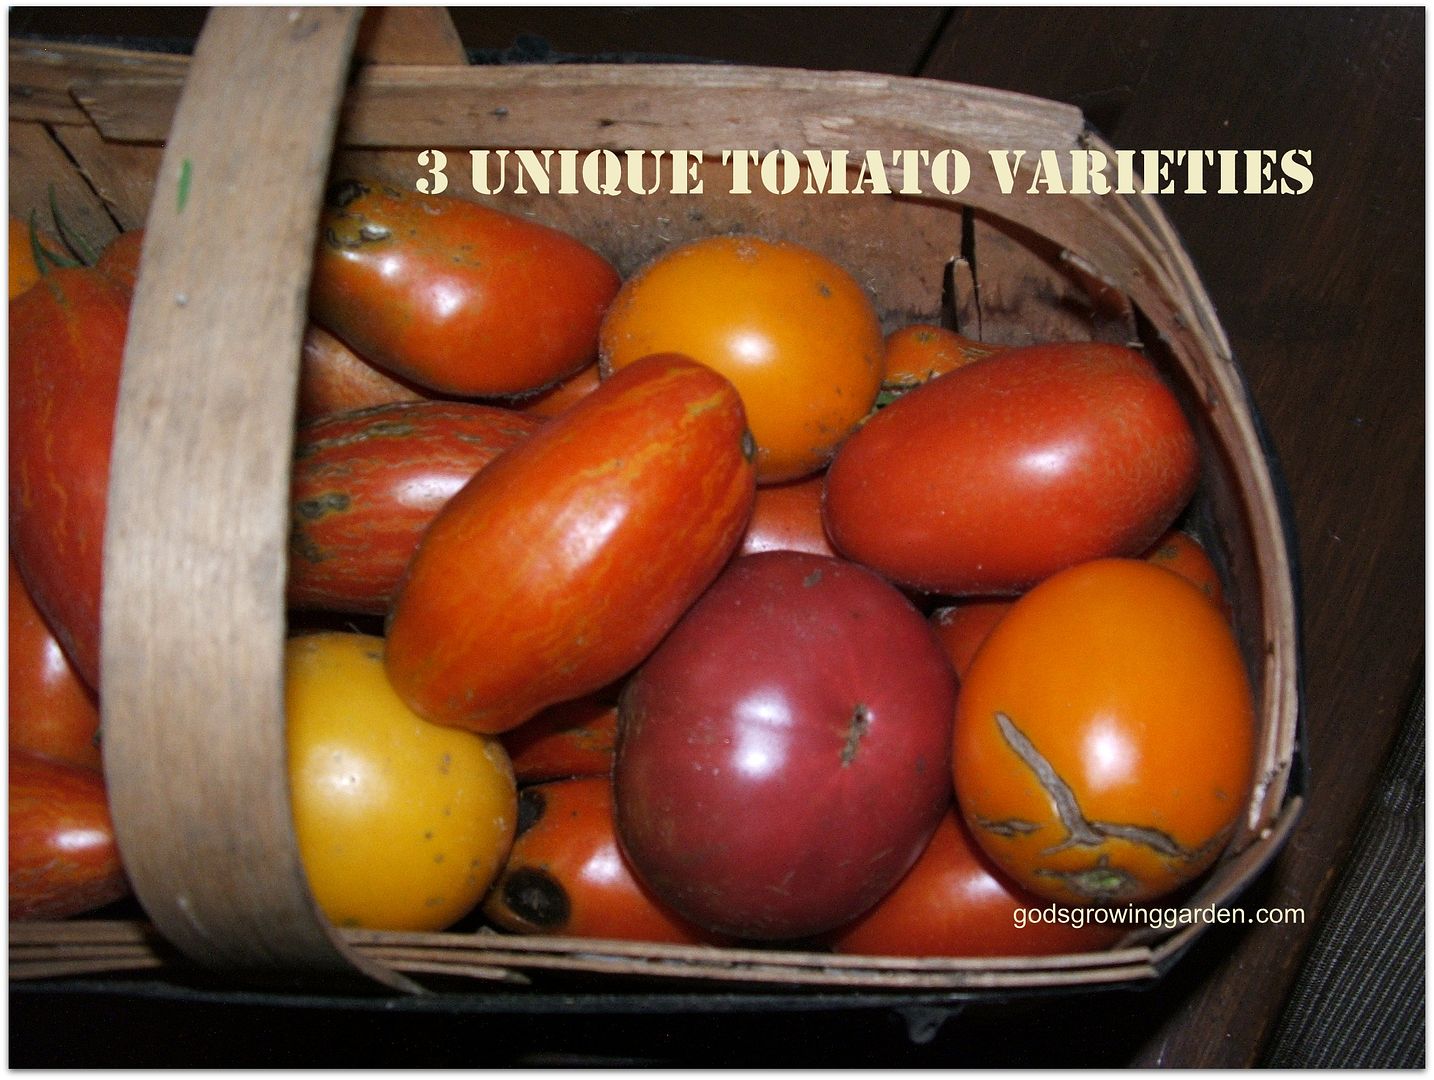 3 Tomato Varieties, by Angie Ouellette-Tower for godsgrowinggarden.com